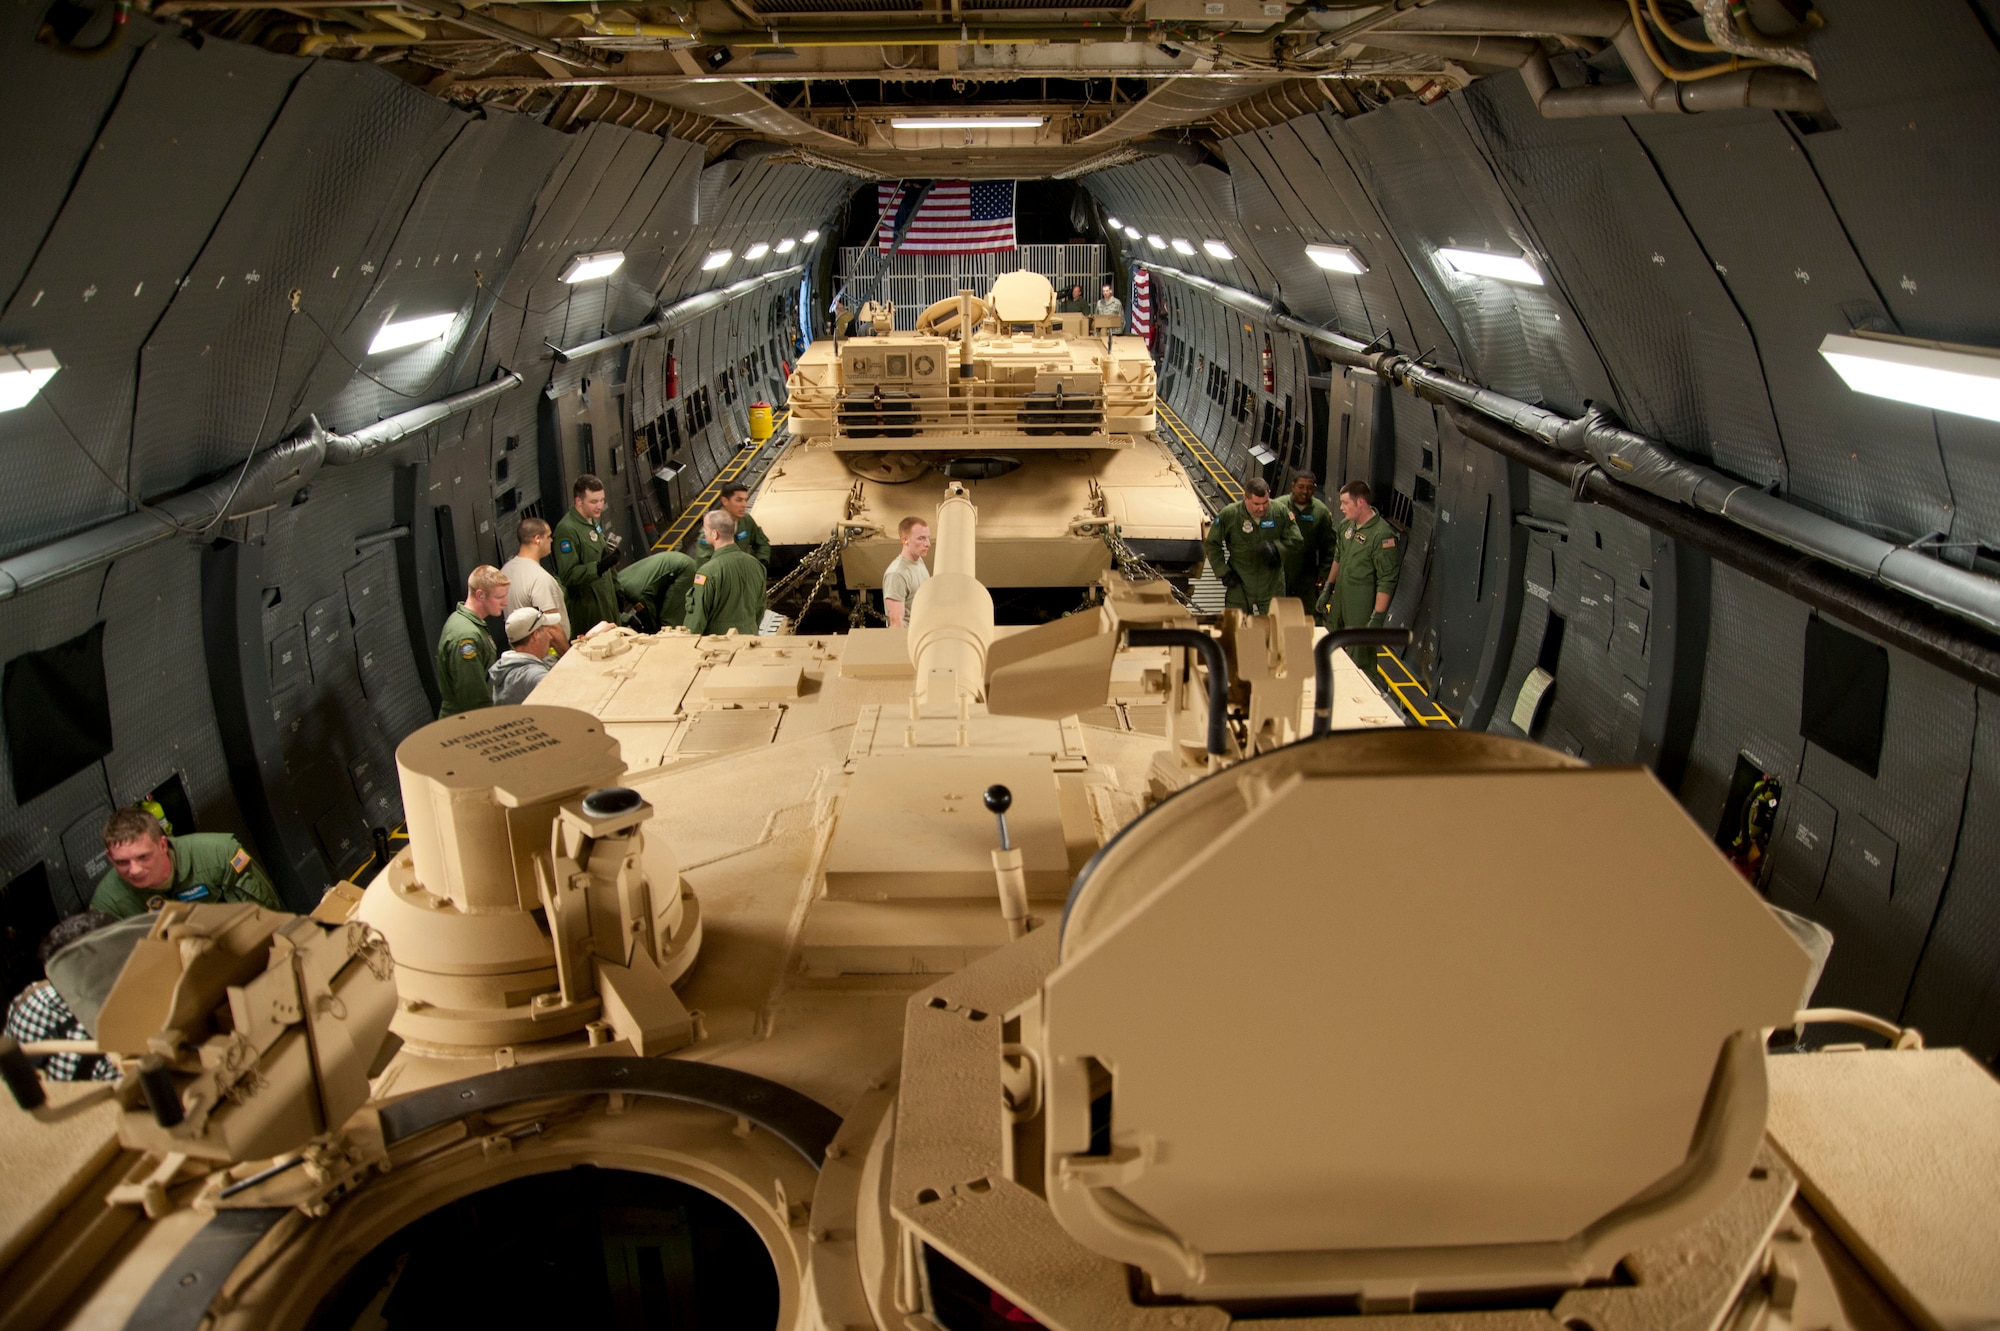 Two M-1 Abrams tanks from Aberdeen Proving Ground, Md., are loaded in the cargo area of a C-5M Super Galaxy assigned to Dover Air Force Base, Del. The C-5M currently holds 42 world aviation records in airlift. The modernized version of the C-5, the Super Galaxy has 70 improvements, including new GE CF6 engines providing 22 percent more thrust and cutting climb time in half. New lighting in the cargo area increases safety of loading and offloading cargo. (U.S. Air Force photo/Lt. Col. Chad E. Gibson)